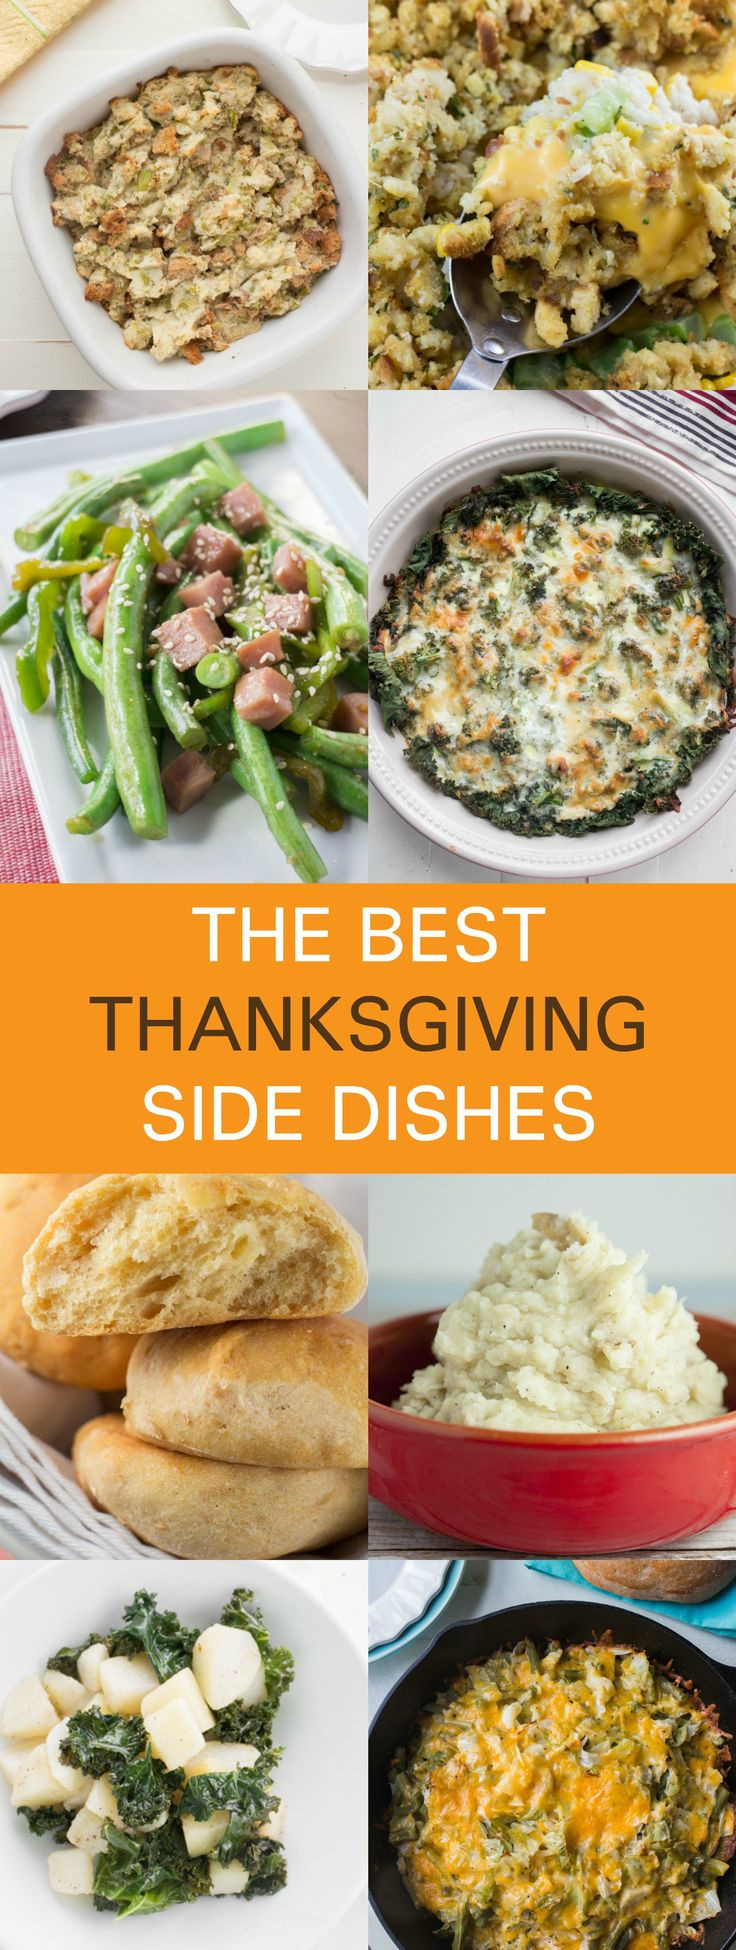 The Best Thanksgiving Side Dishes
 17 Best images about Thanksgiving on Pinterest